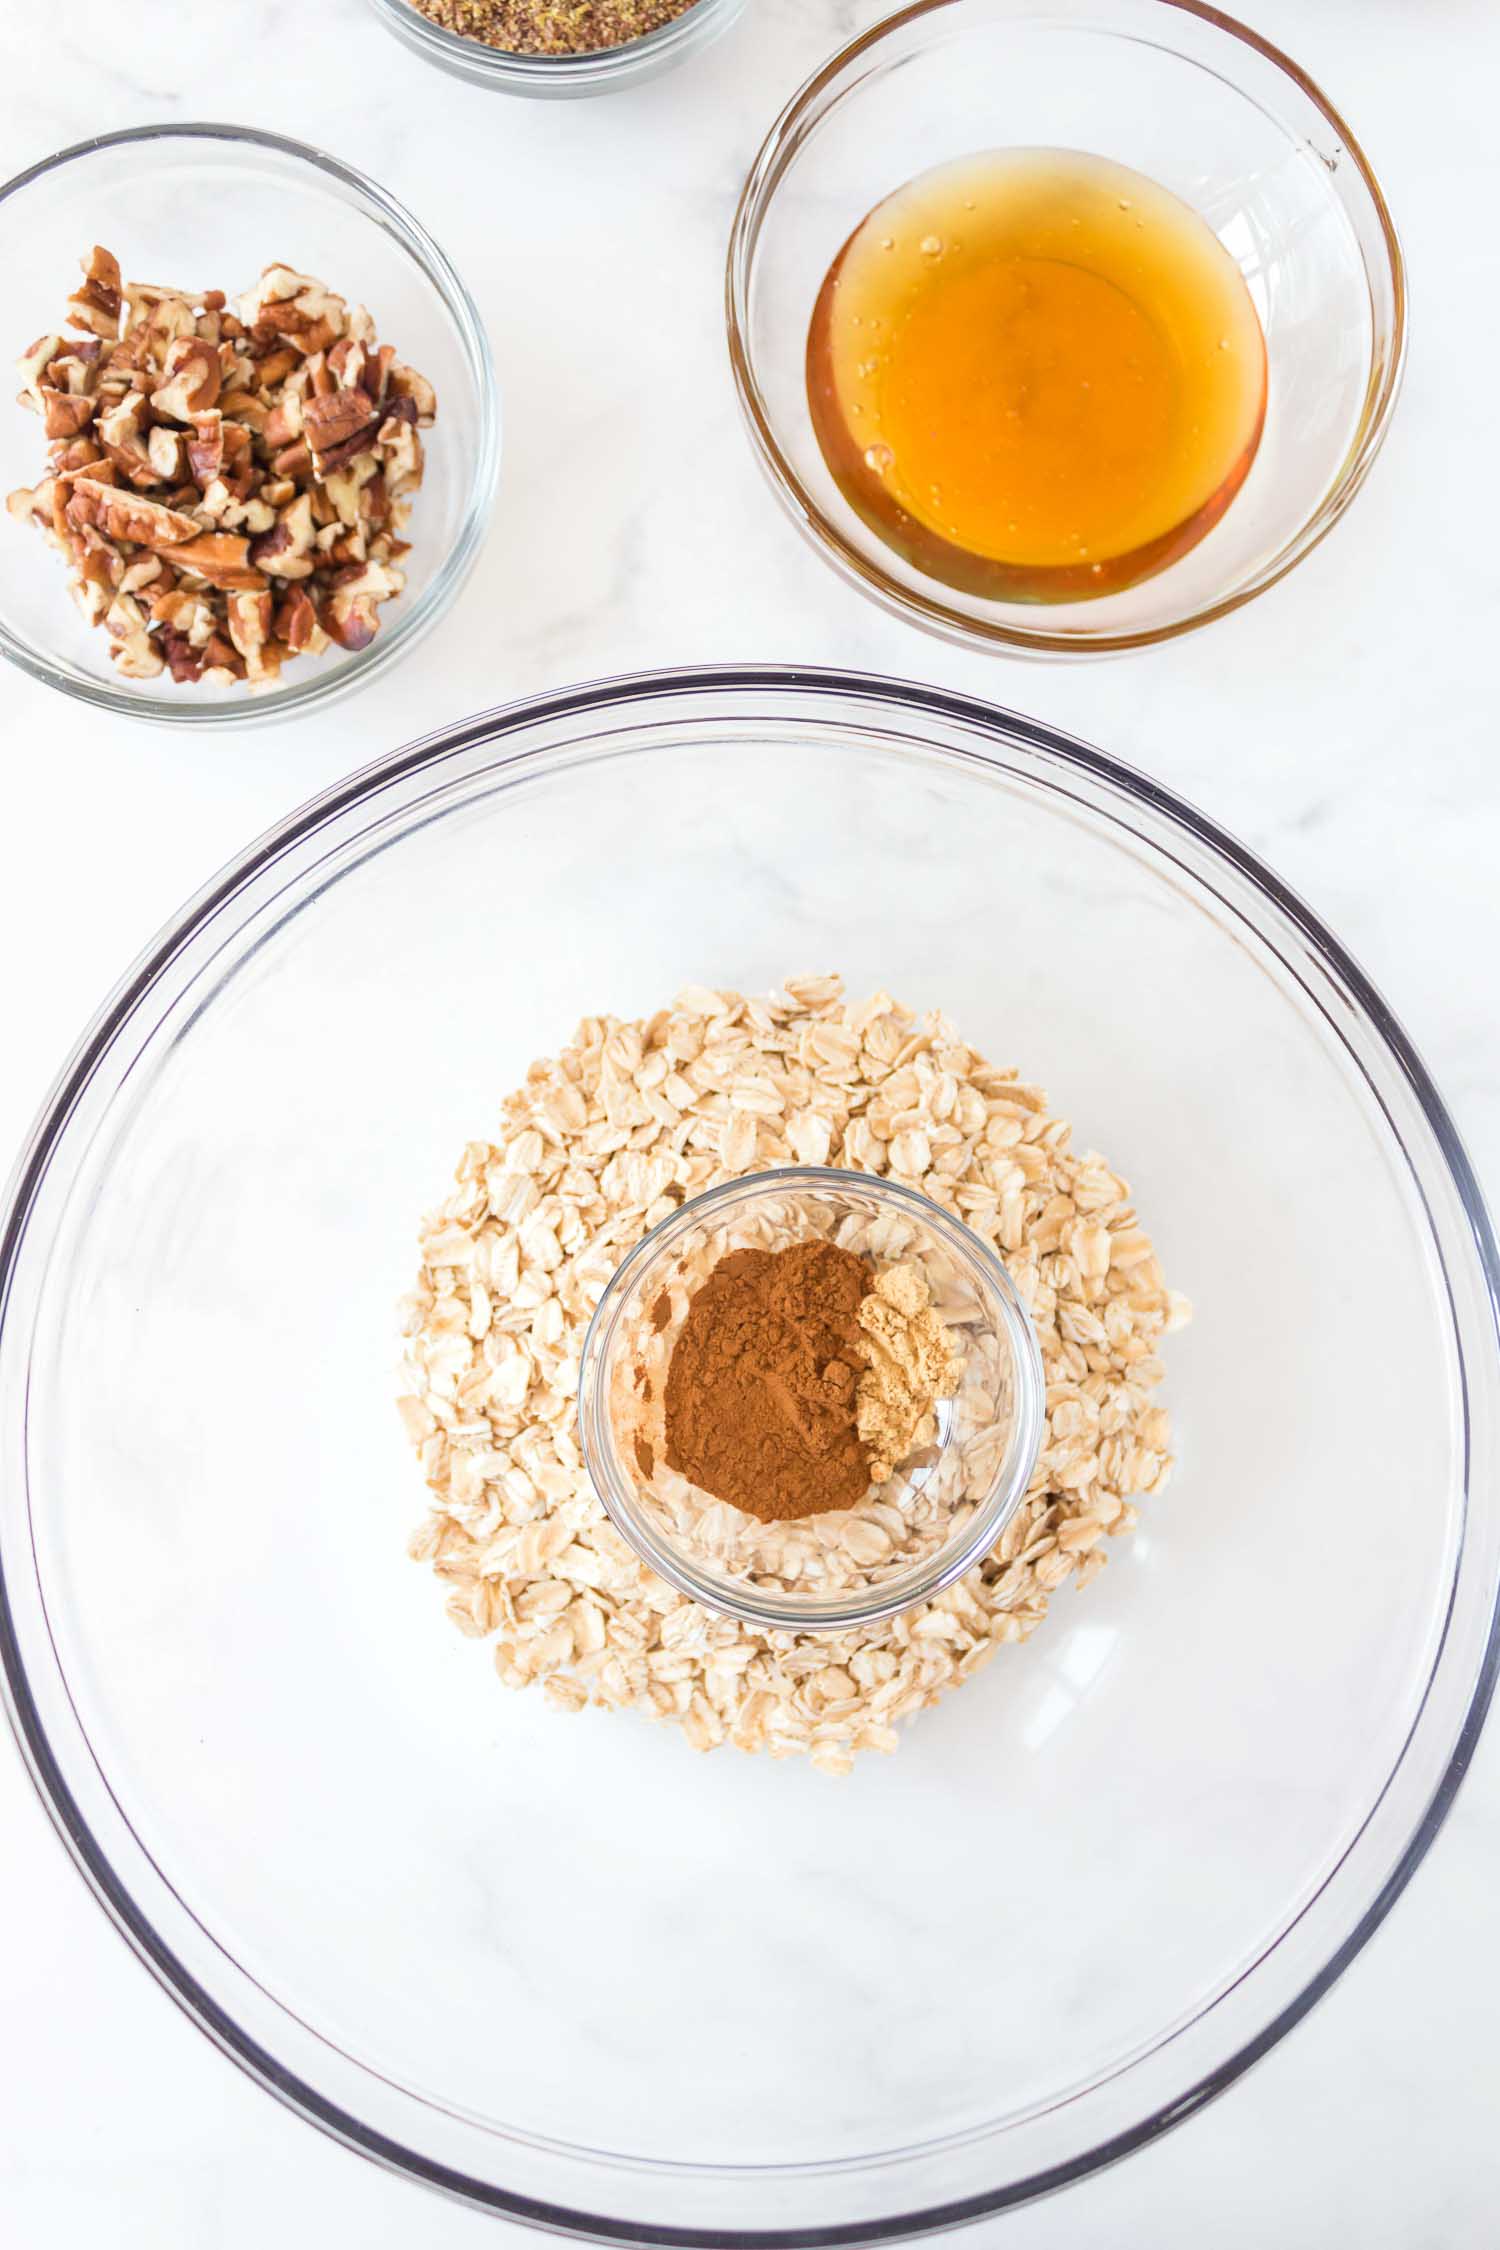 A large glass bowl of oatmeal with a smaller glass bowl of spices on top of it with smaller glass bowls of honey and pecans behind it.